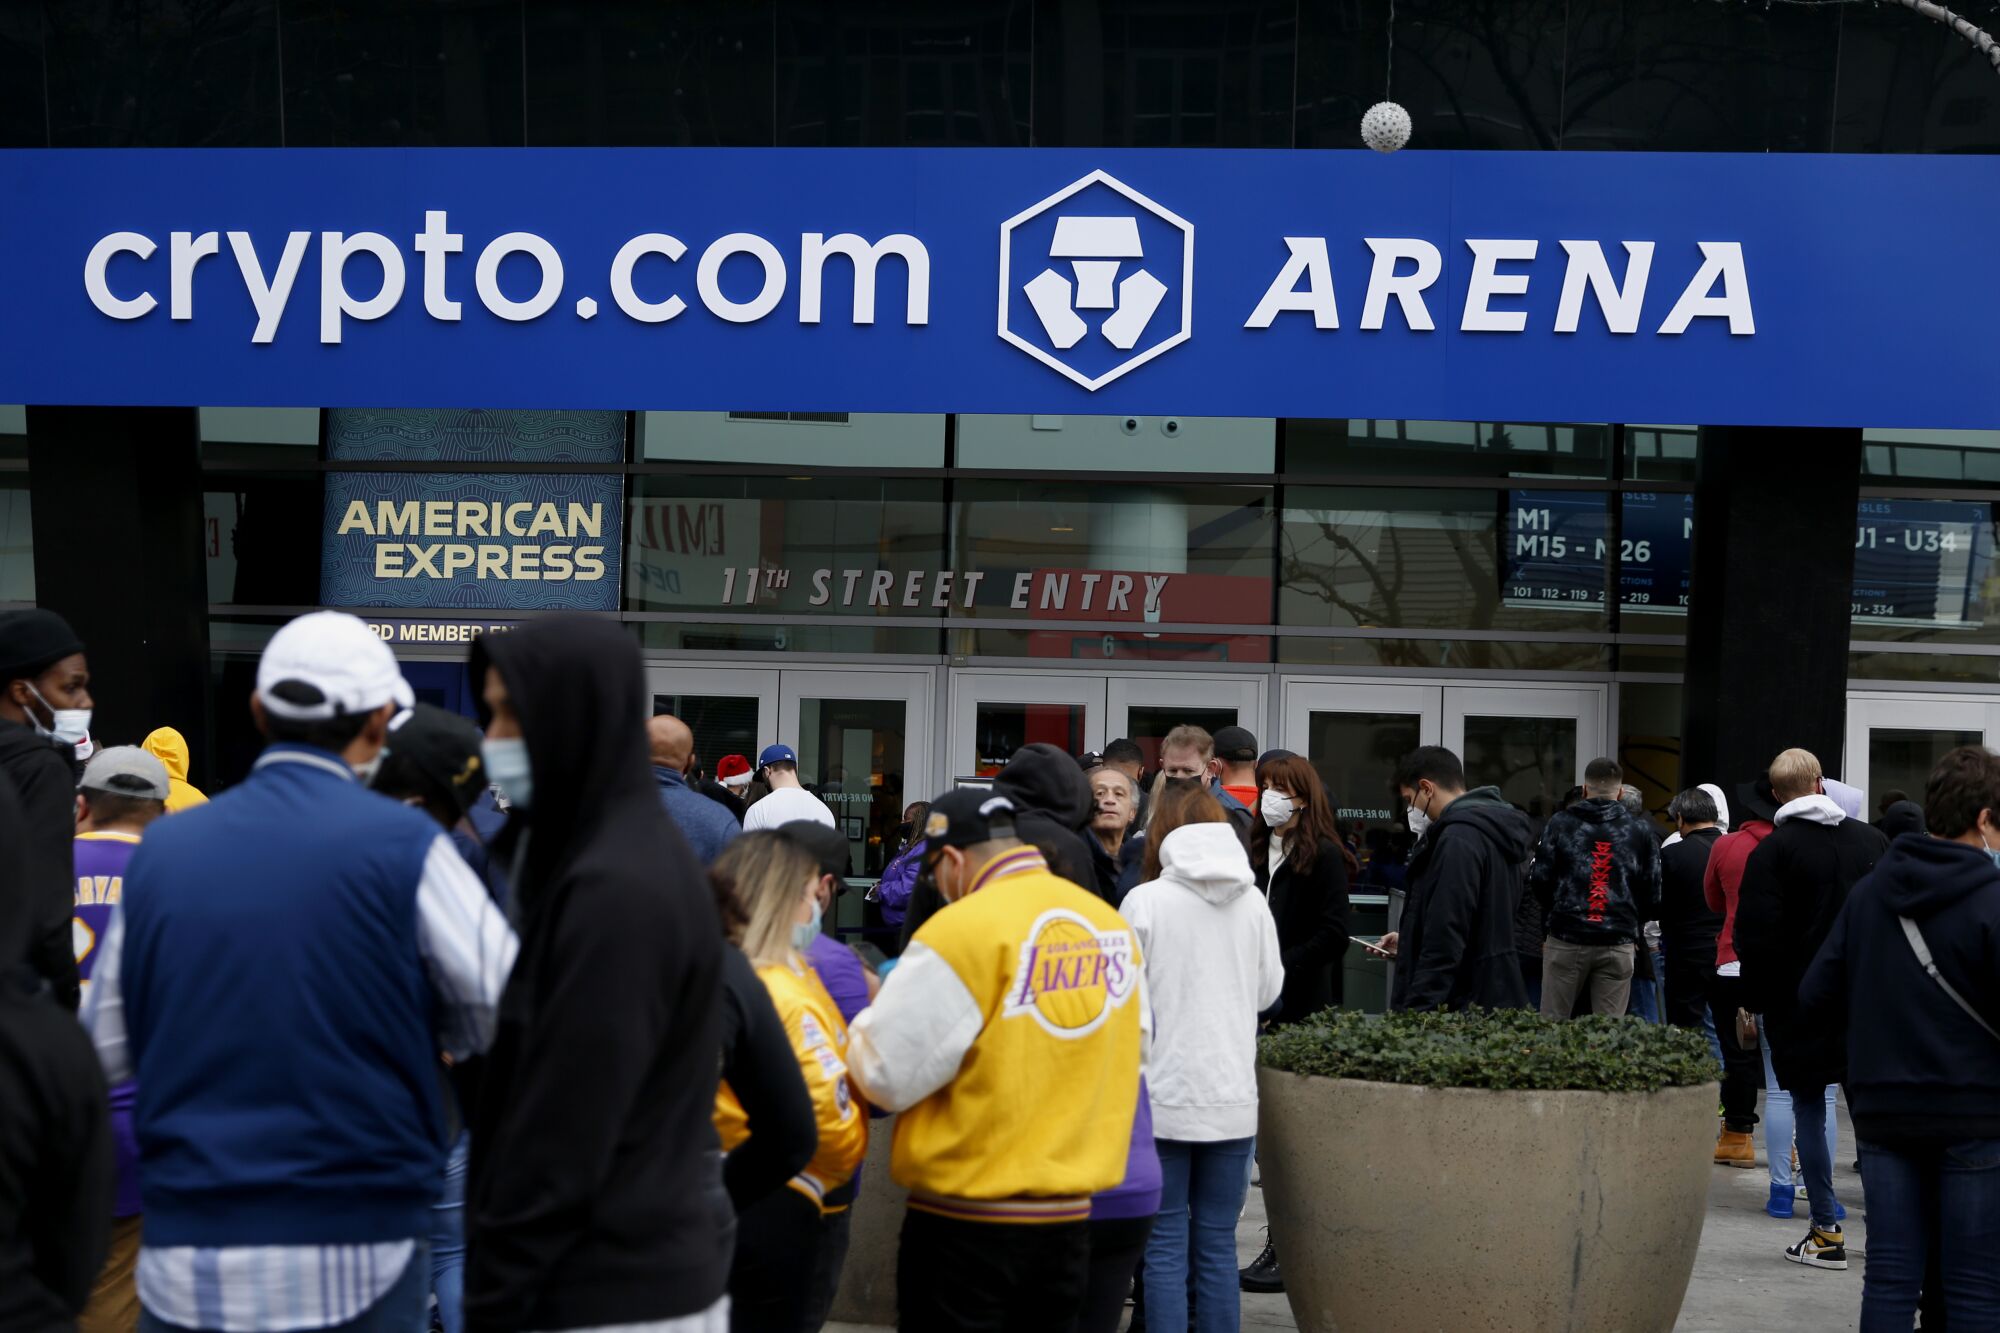 Fans stand outside Crypto.com Arena before the start of Sunday's game between the Lakers and Brooklyn Nets.